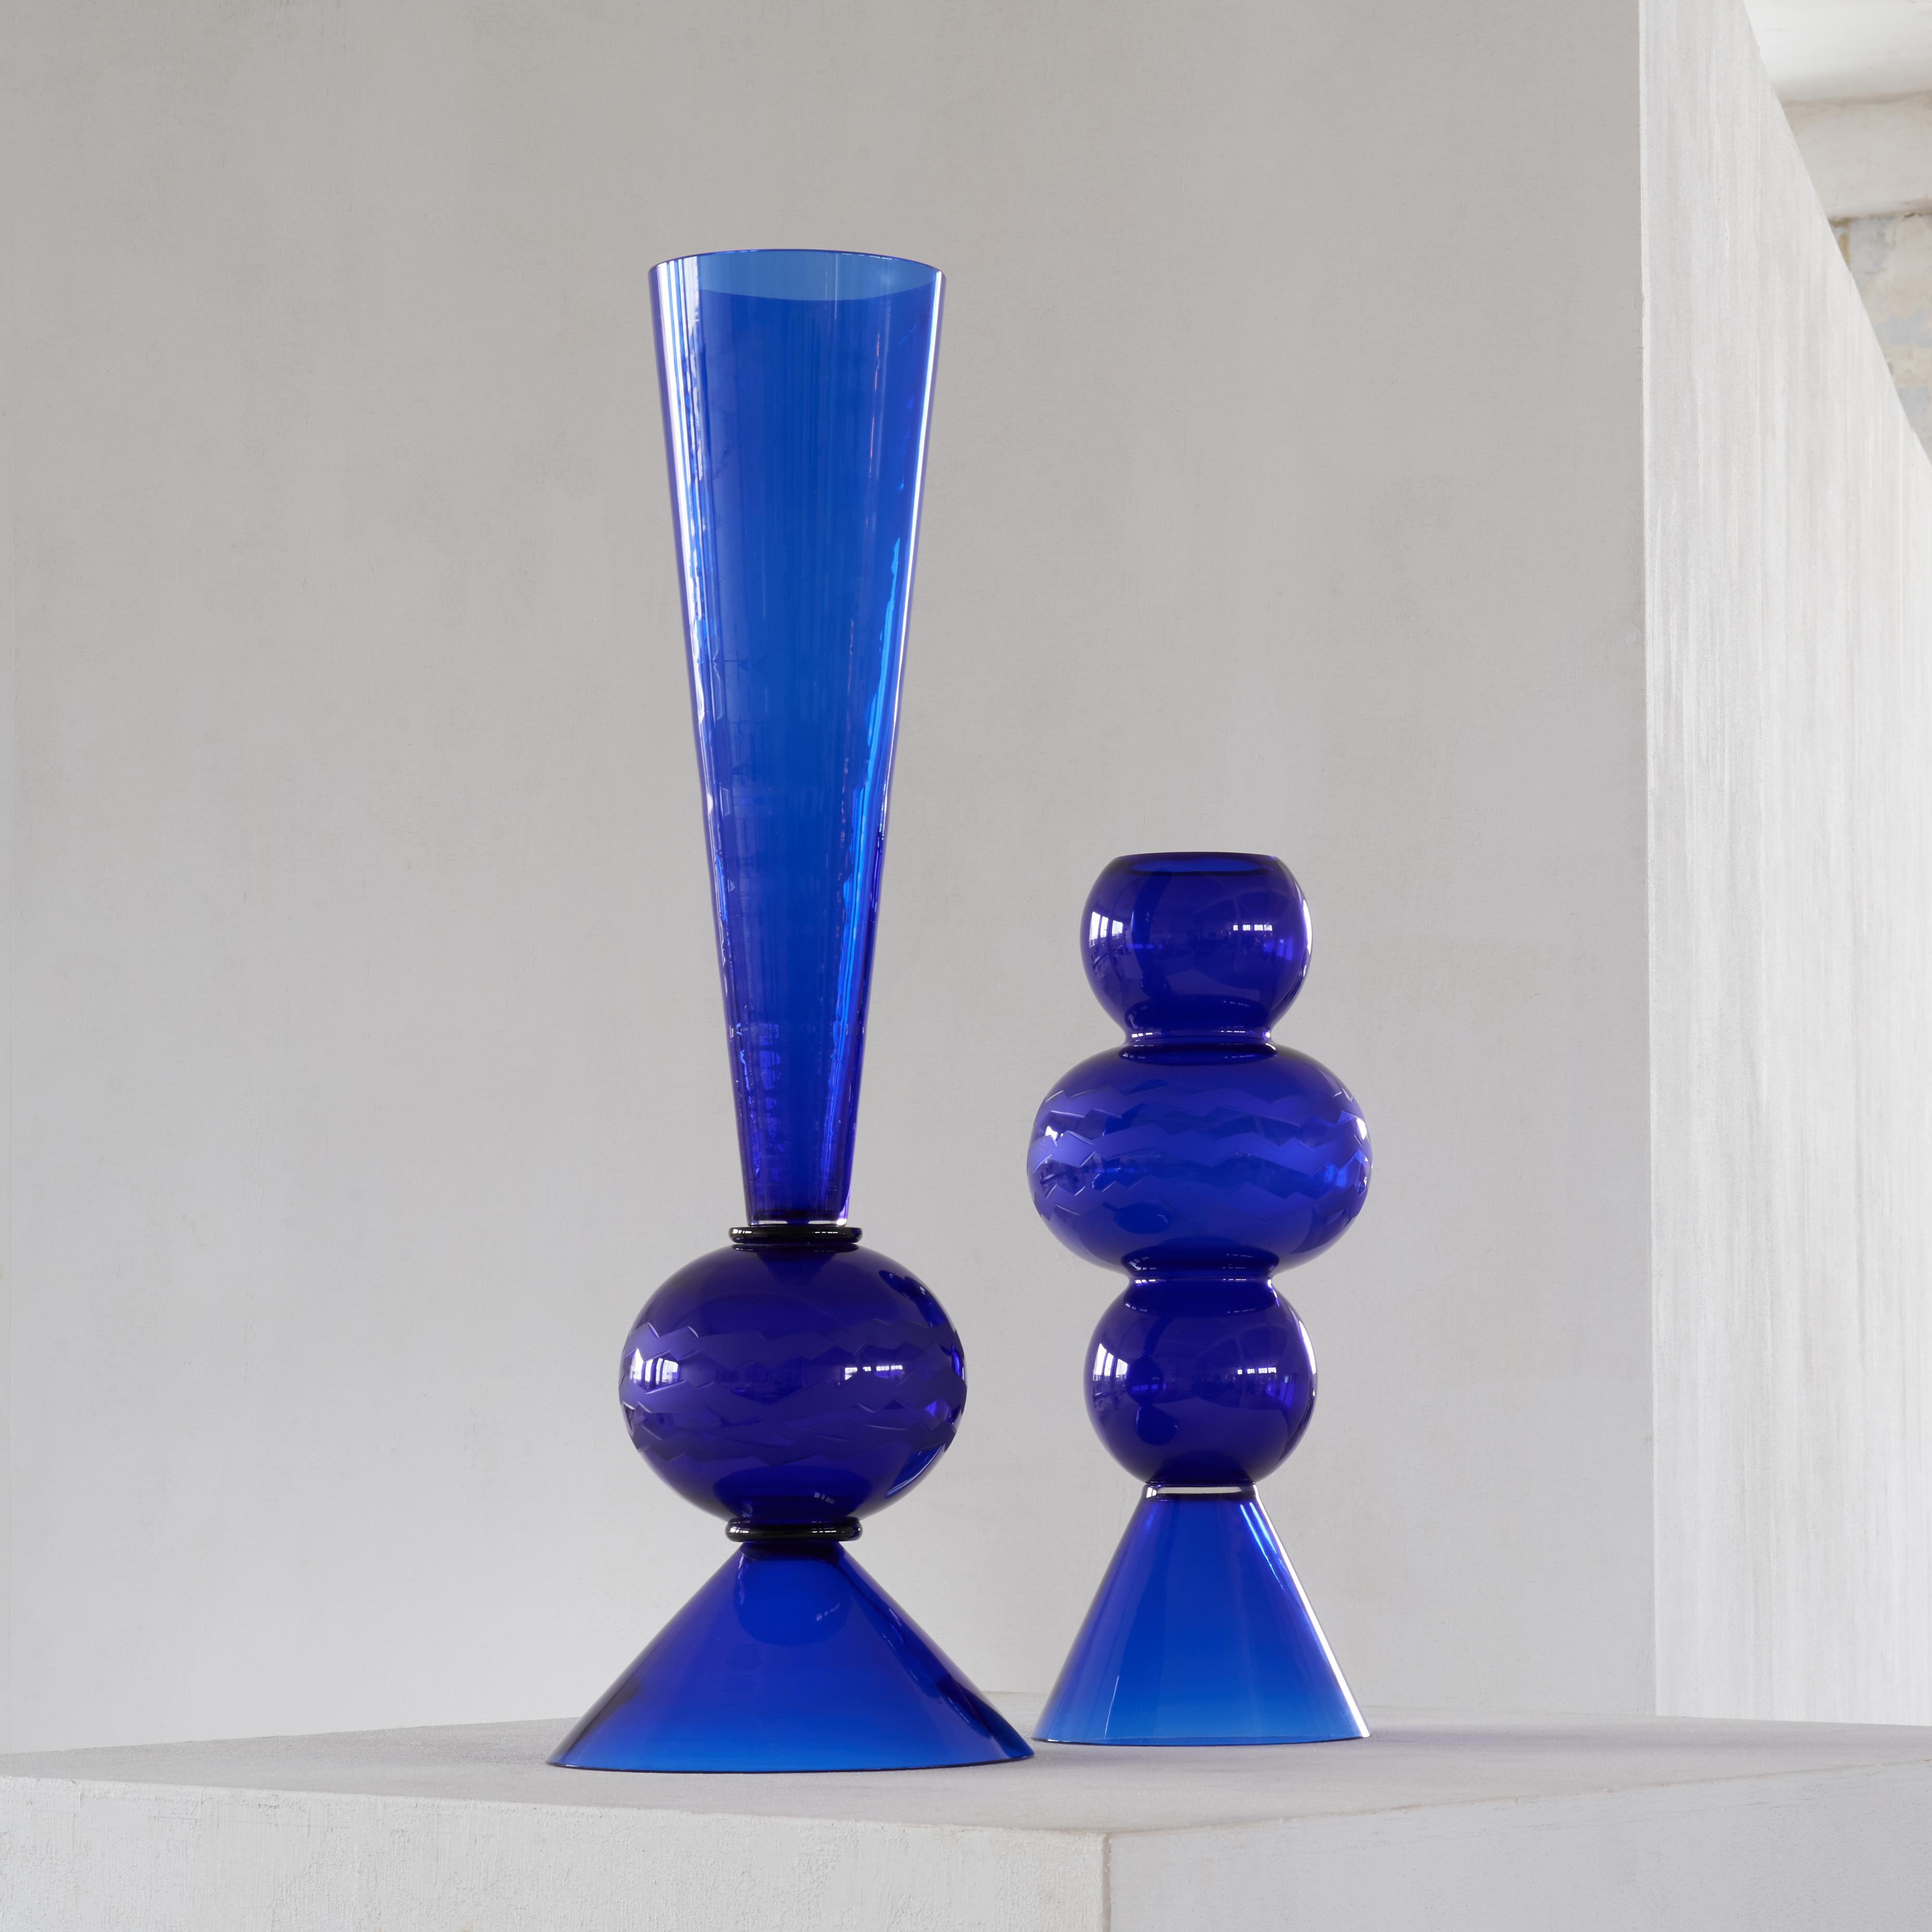 Hand-Crafted Pair of Very Large Memphis Glass Objects by Matteo Thun for Tiffany & Co. 1987 For Sale